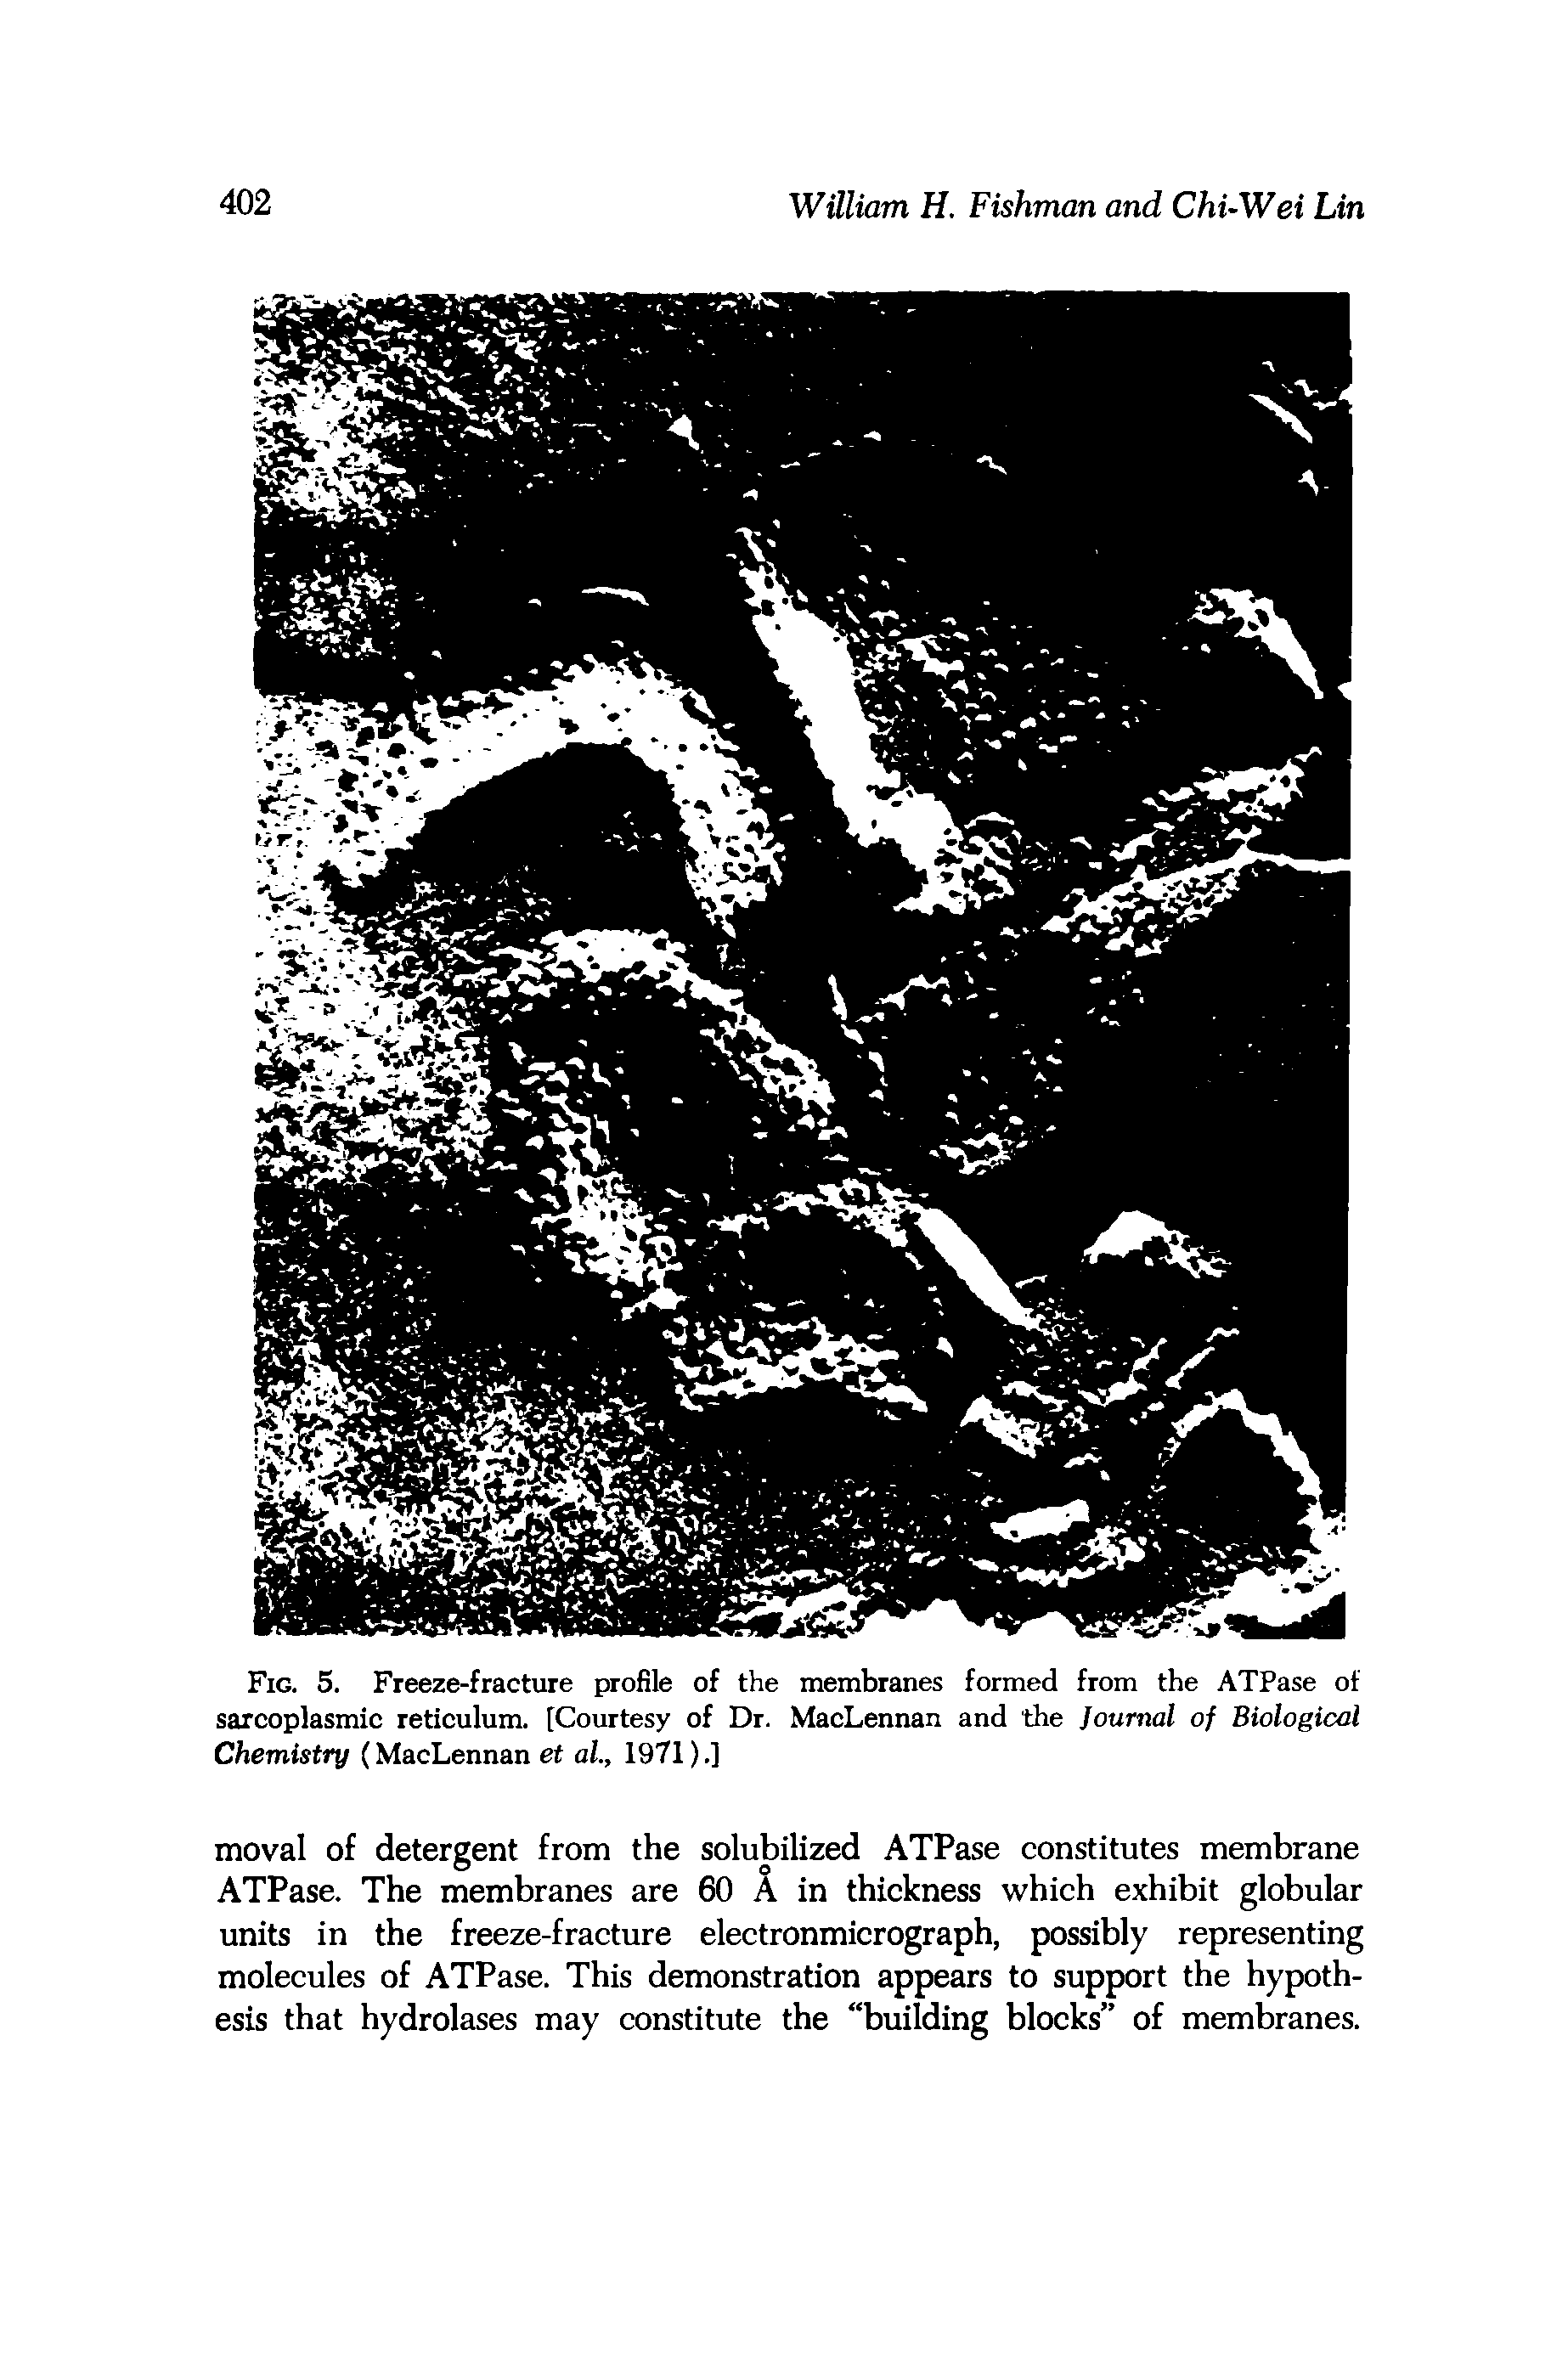 Fig. 5. Freeze-fracture profile of the membranes formed from the ATPase of sarcoplasmic reticulum. [Courtesy of Dr. MacLennan and the Journal of Biological Chemistry (MacLennan et al, 1971).]...